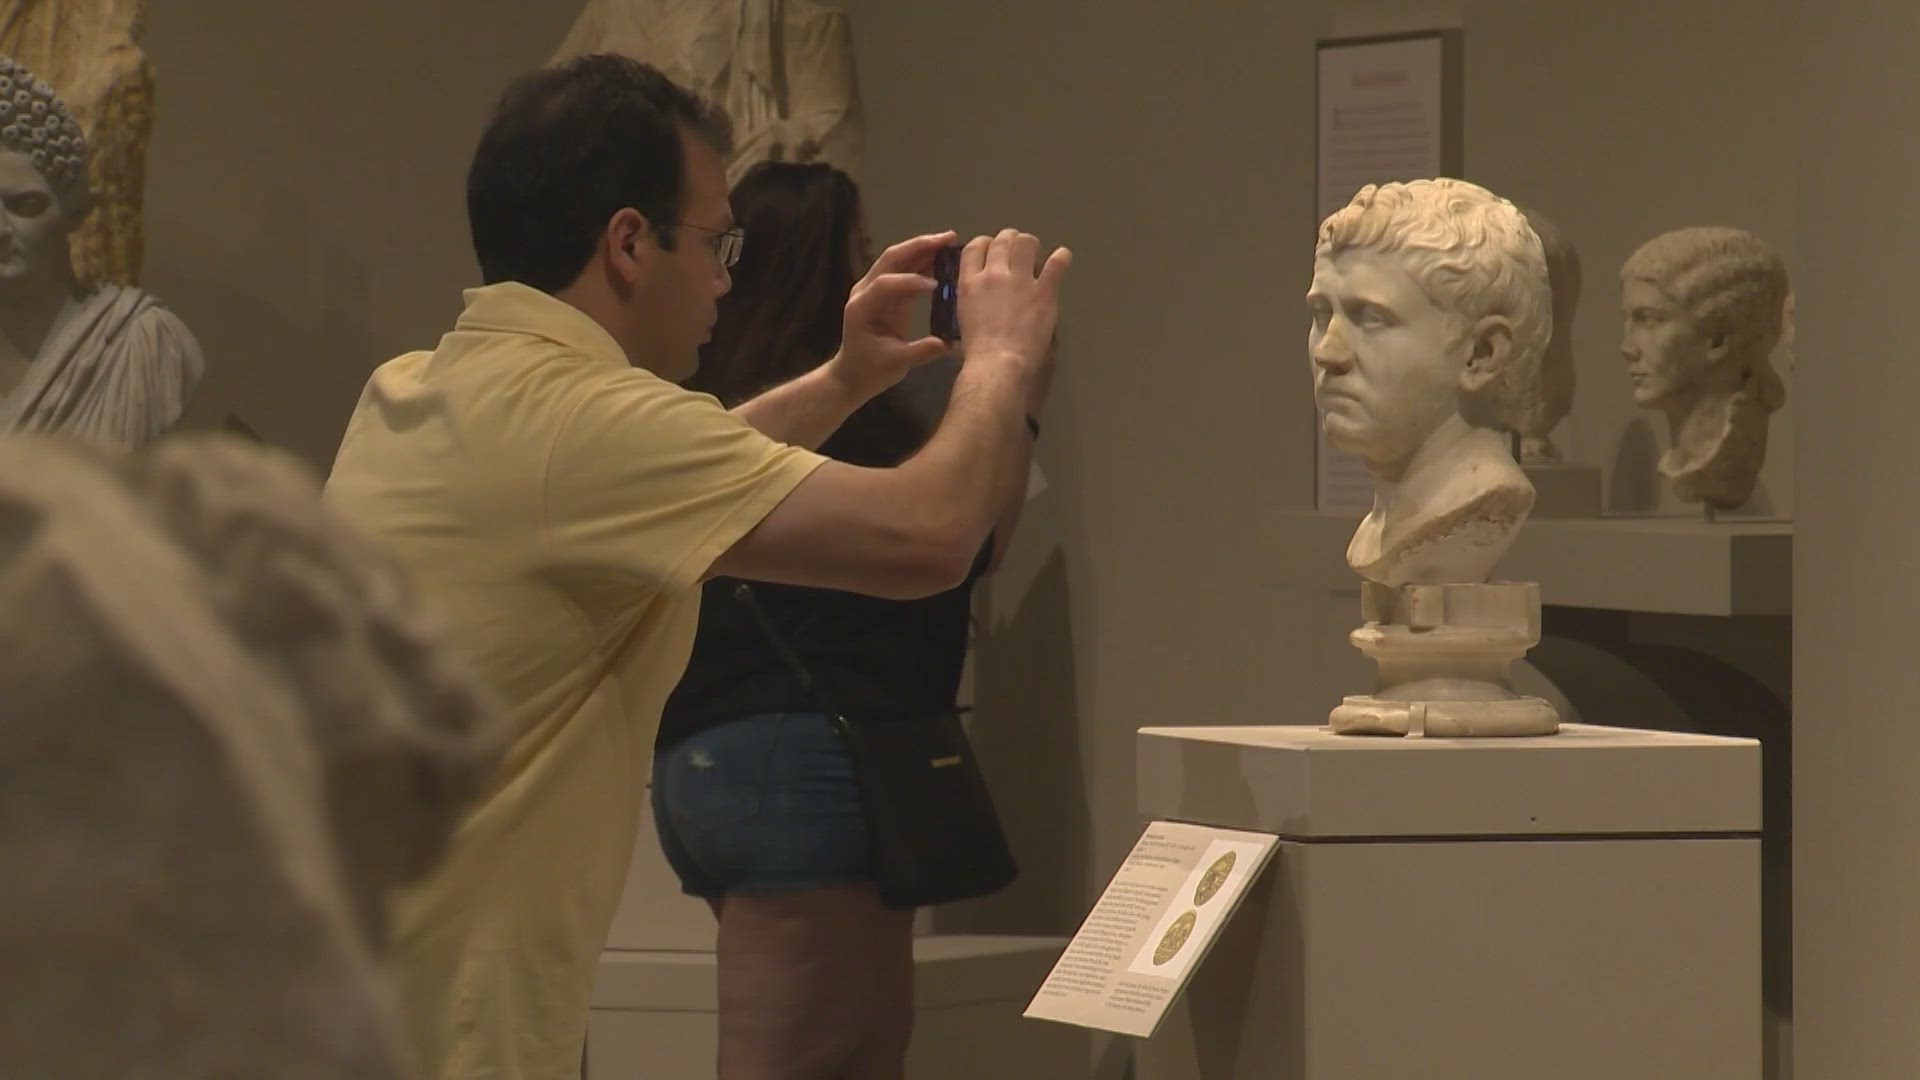 A Roman Bust Discovered at Goodwill Goes on Display in San Antonio